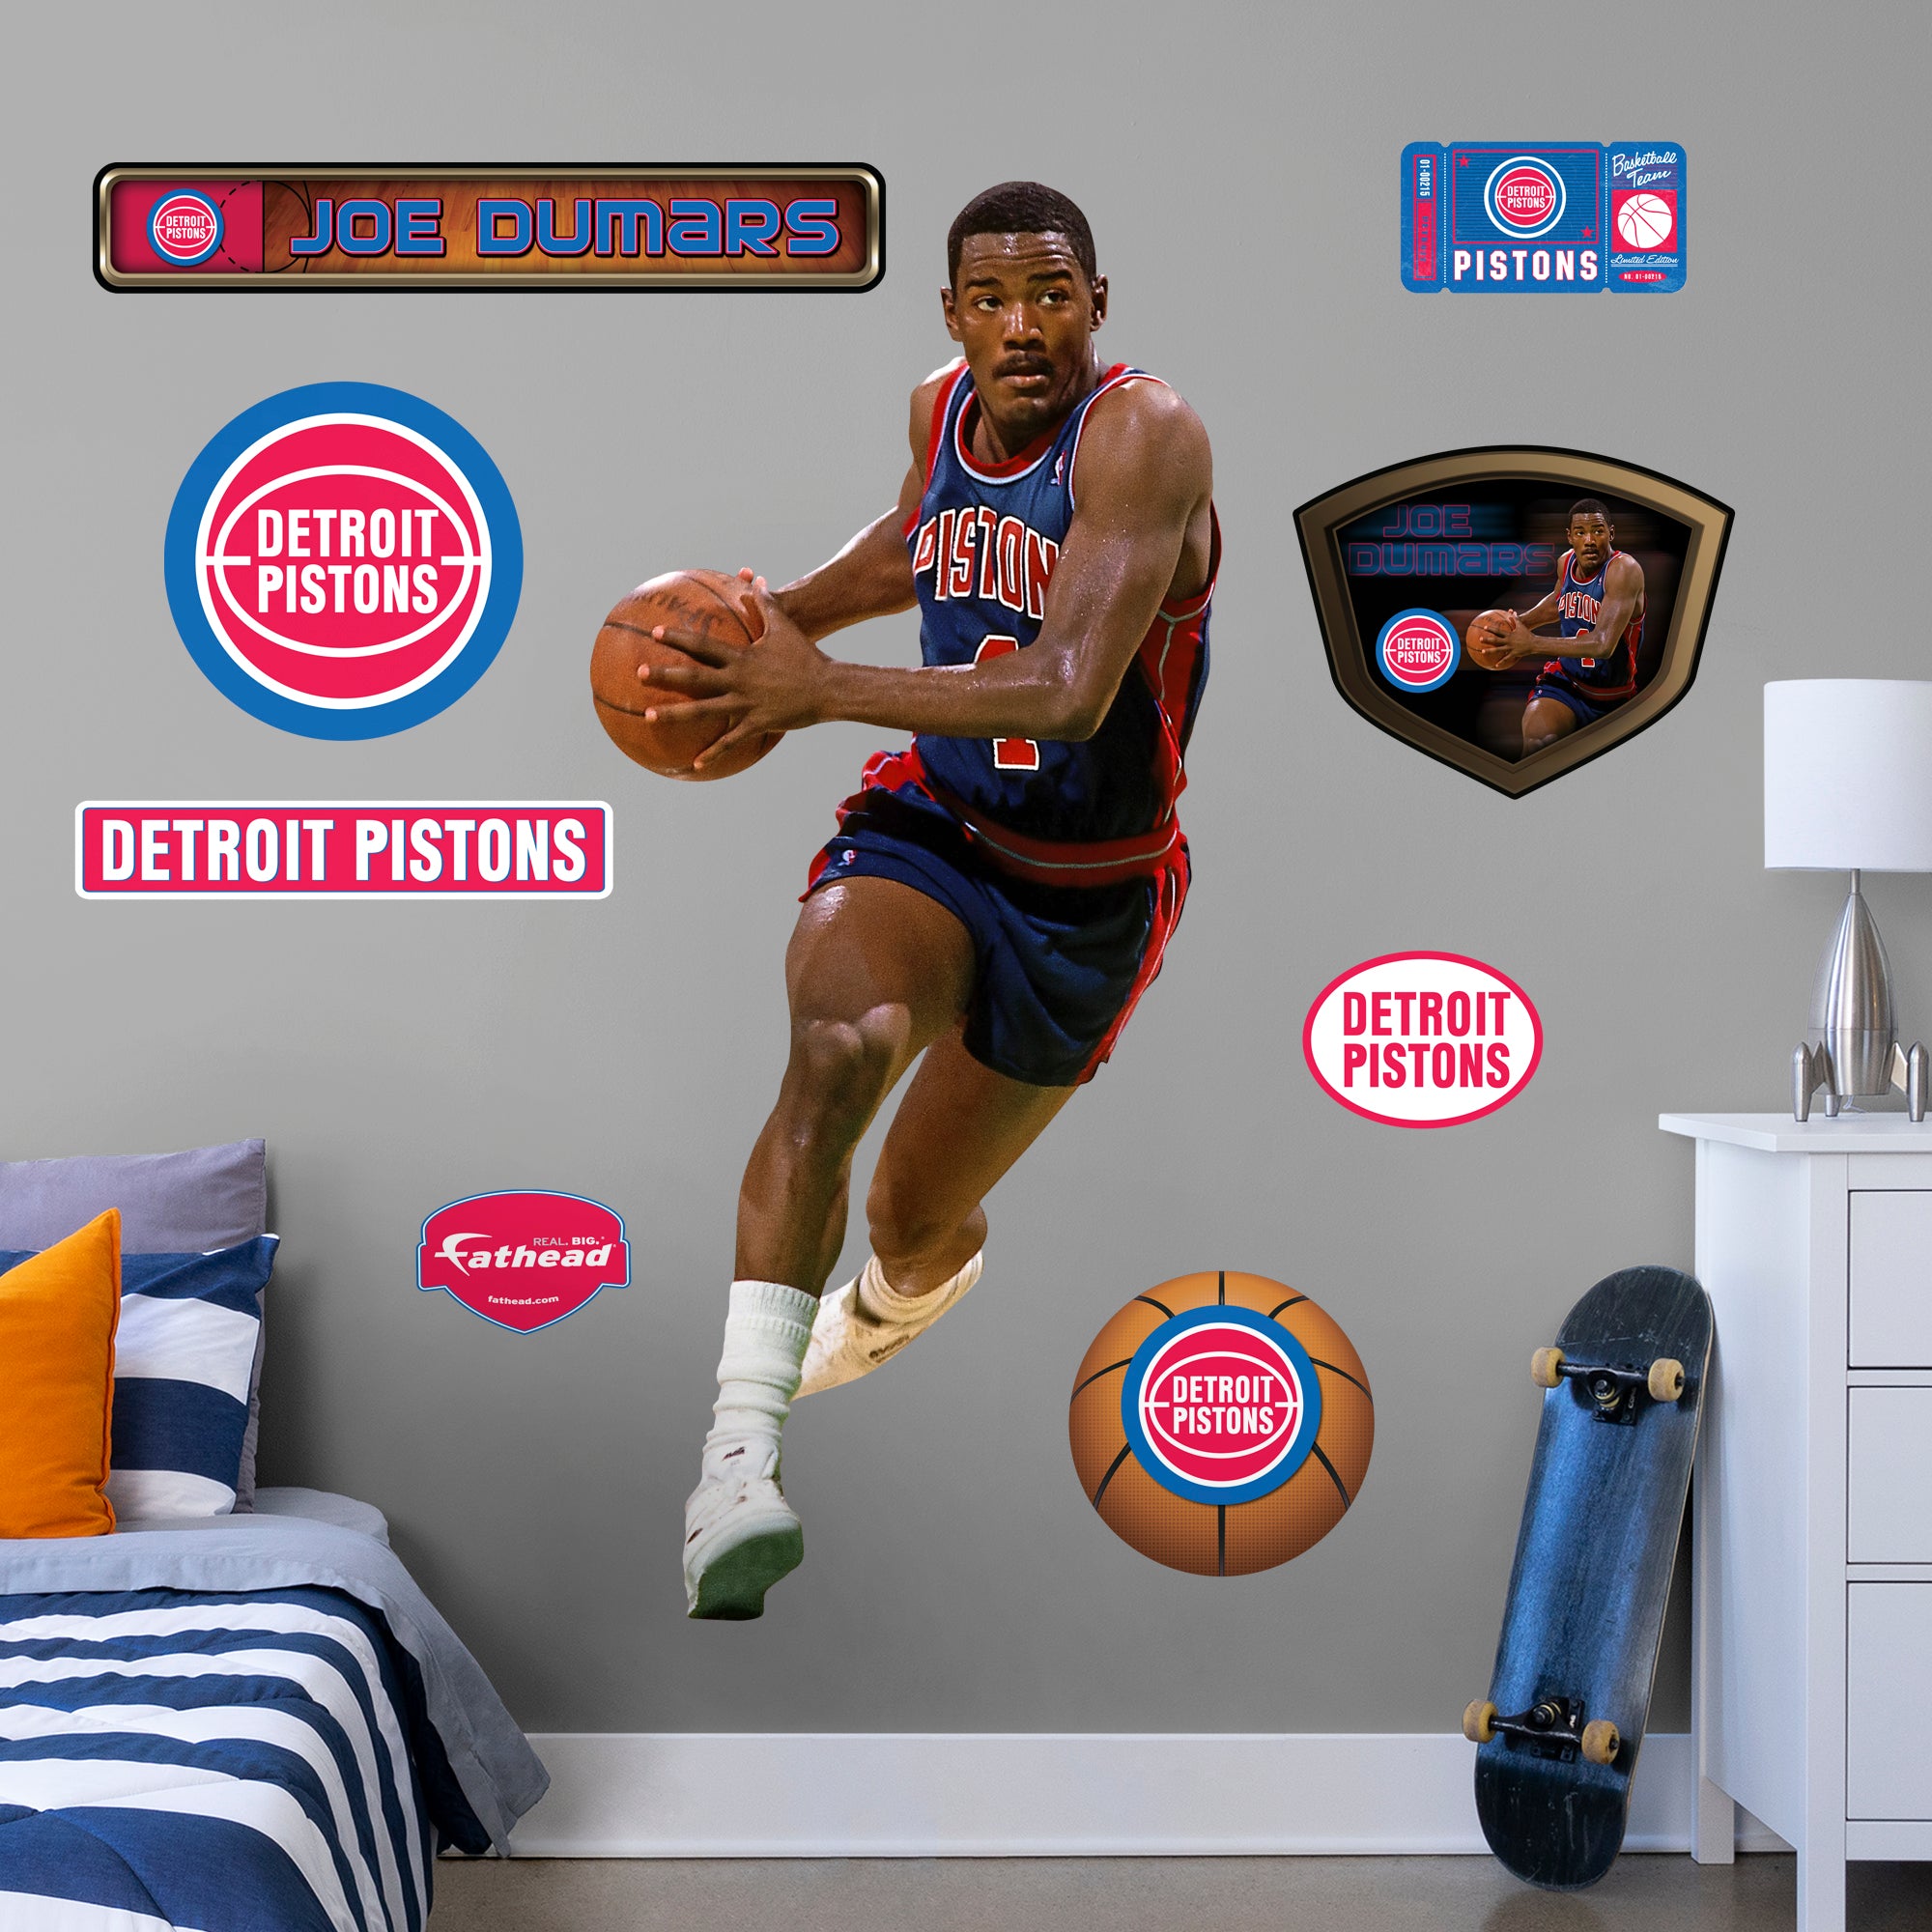 Joe Dumars Legend - Officially Licensed NBA Removable Wall Decal Life-Size Athlete + 8 Decals (34"W x 77"H) by Fathead | Vinyl